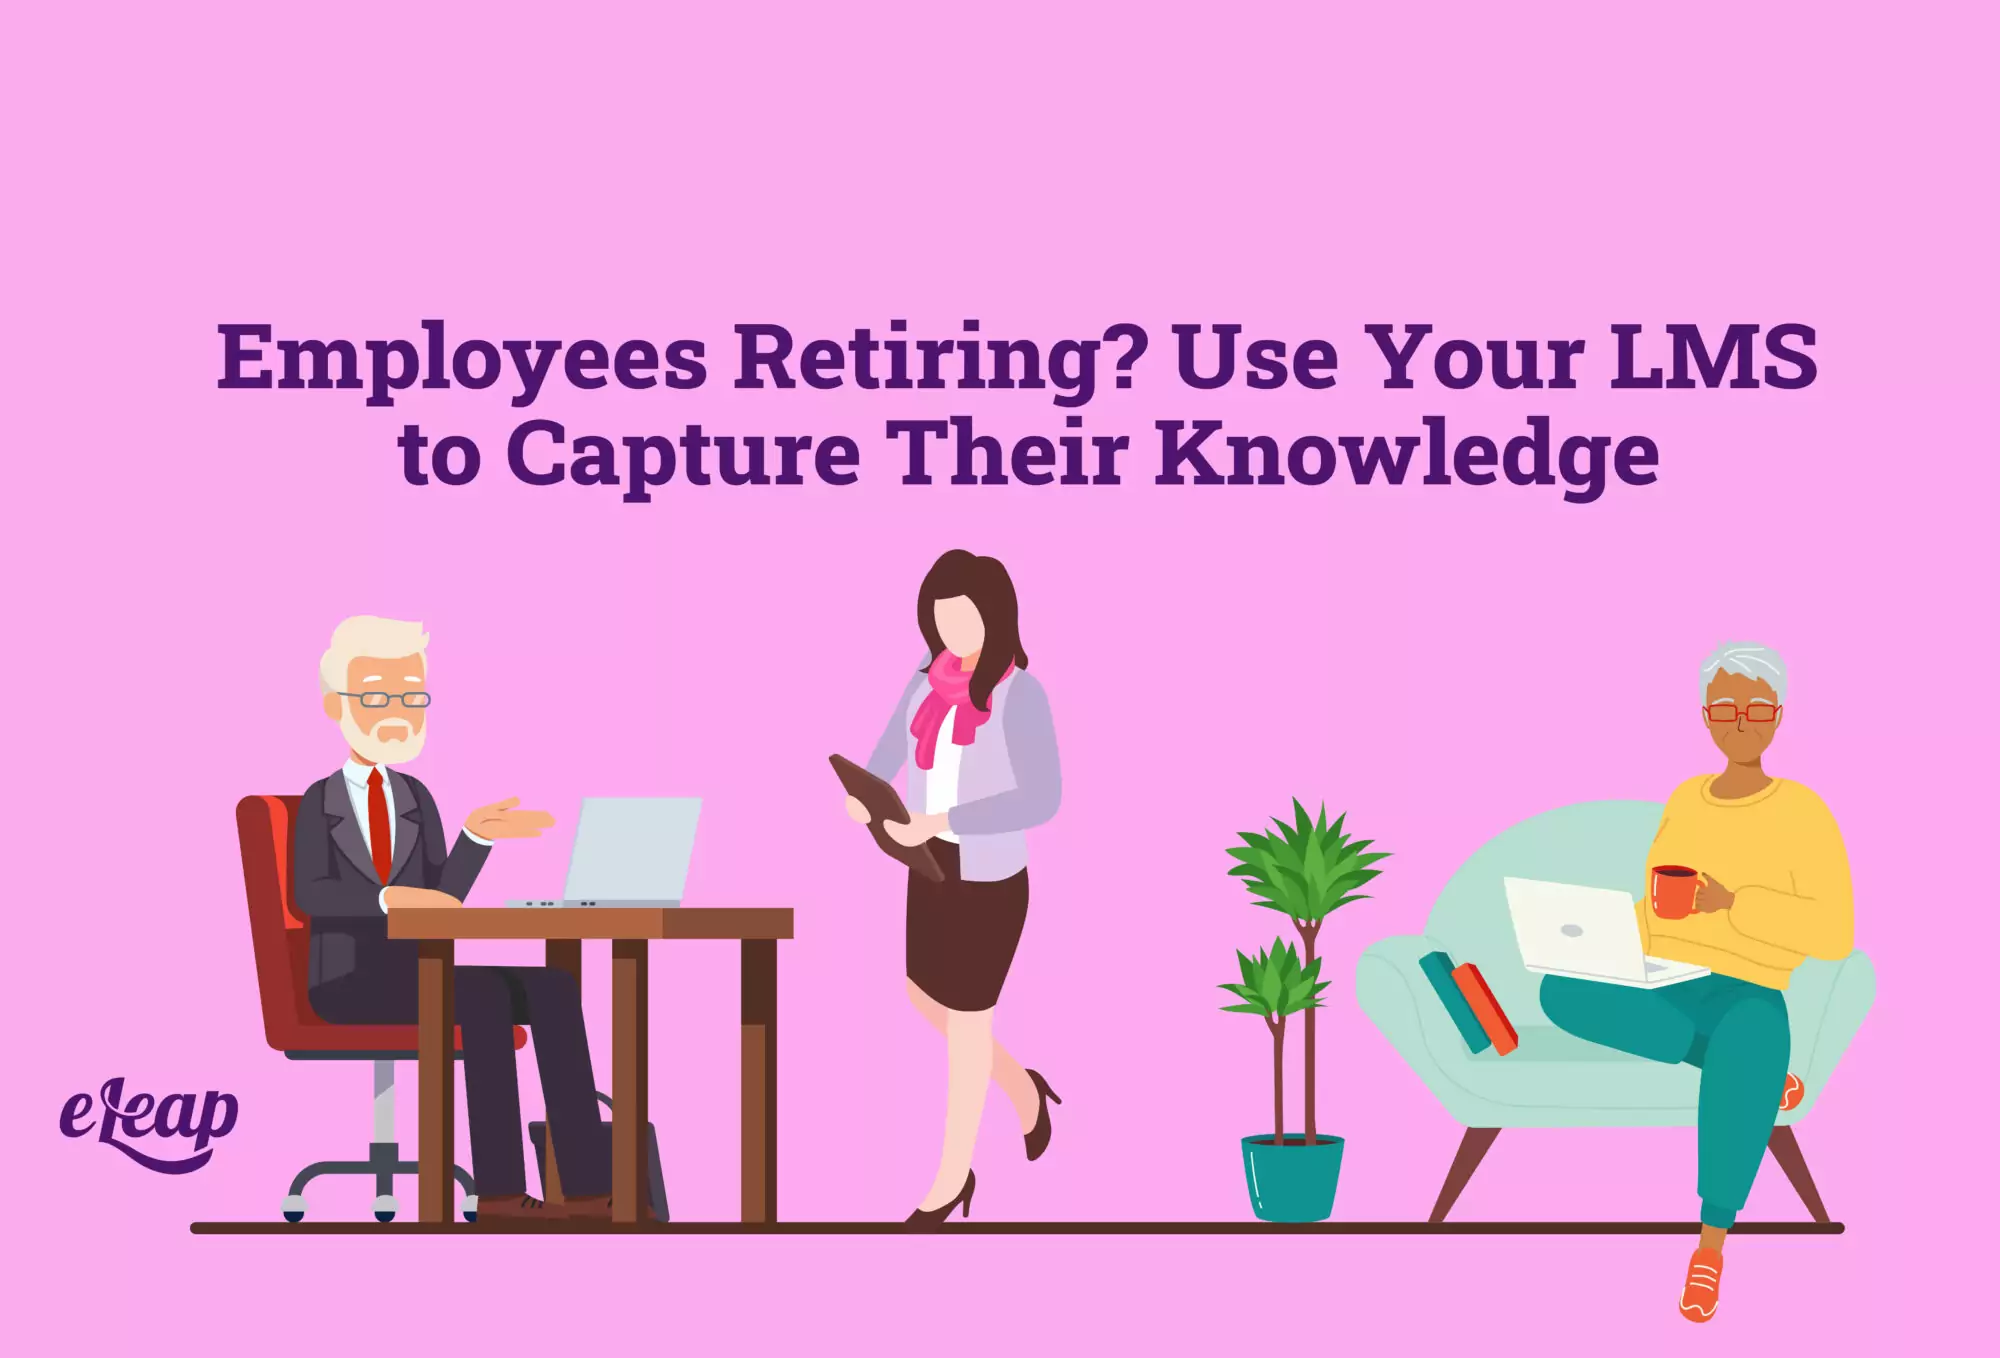 Employees Retiring? Use Your LMS to Capture Their Knowledge